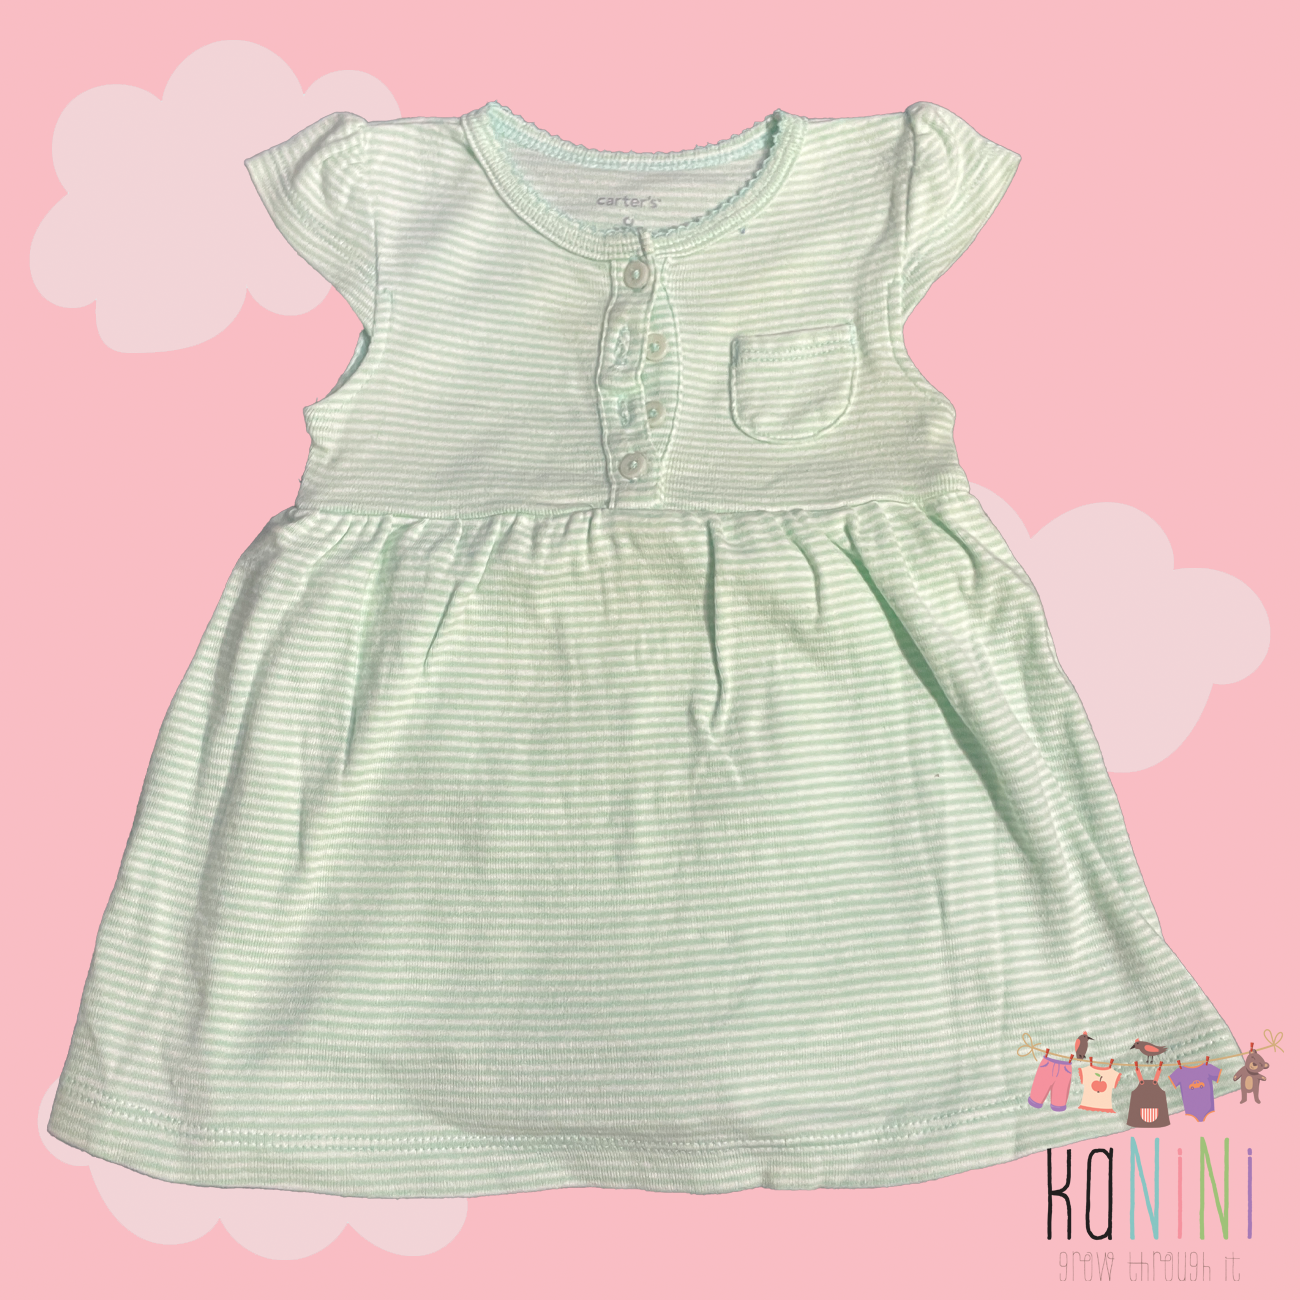 Featured image for “Carter's 9 Months Girls Striped Dress”